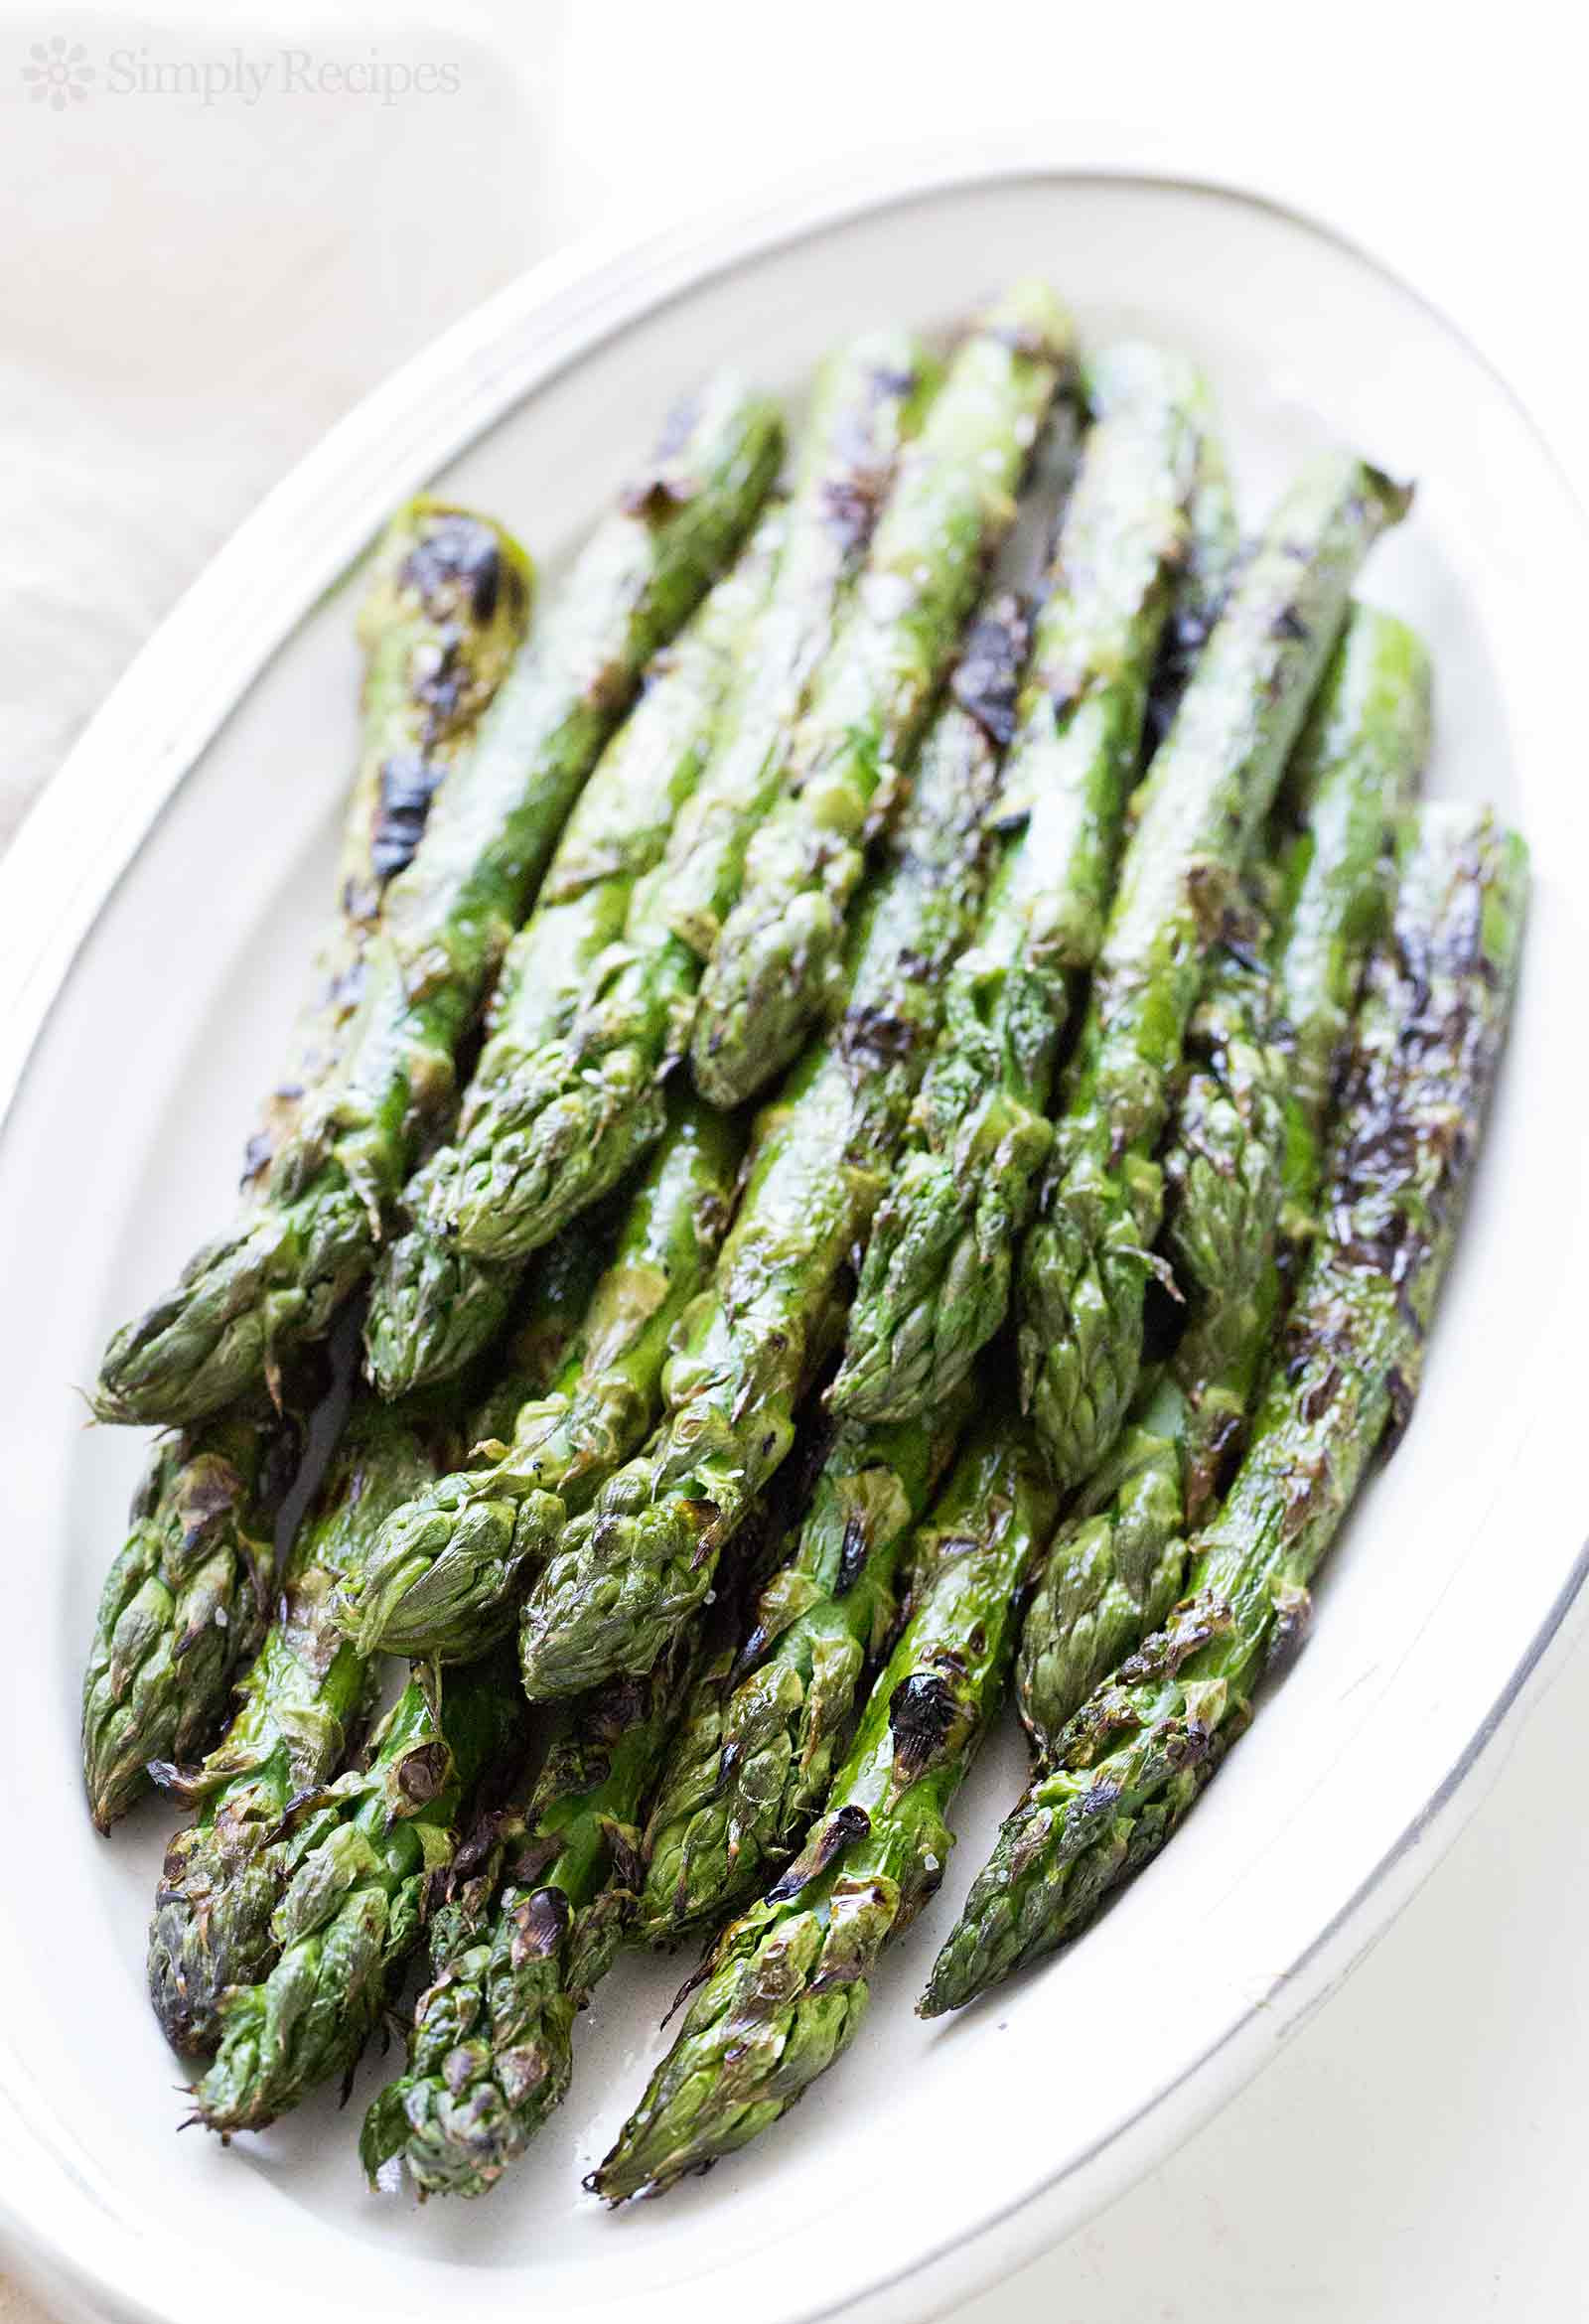 Cooking Asparagus On The Grill
 Grilled Asparagus Recipe